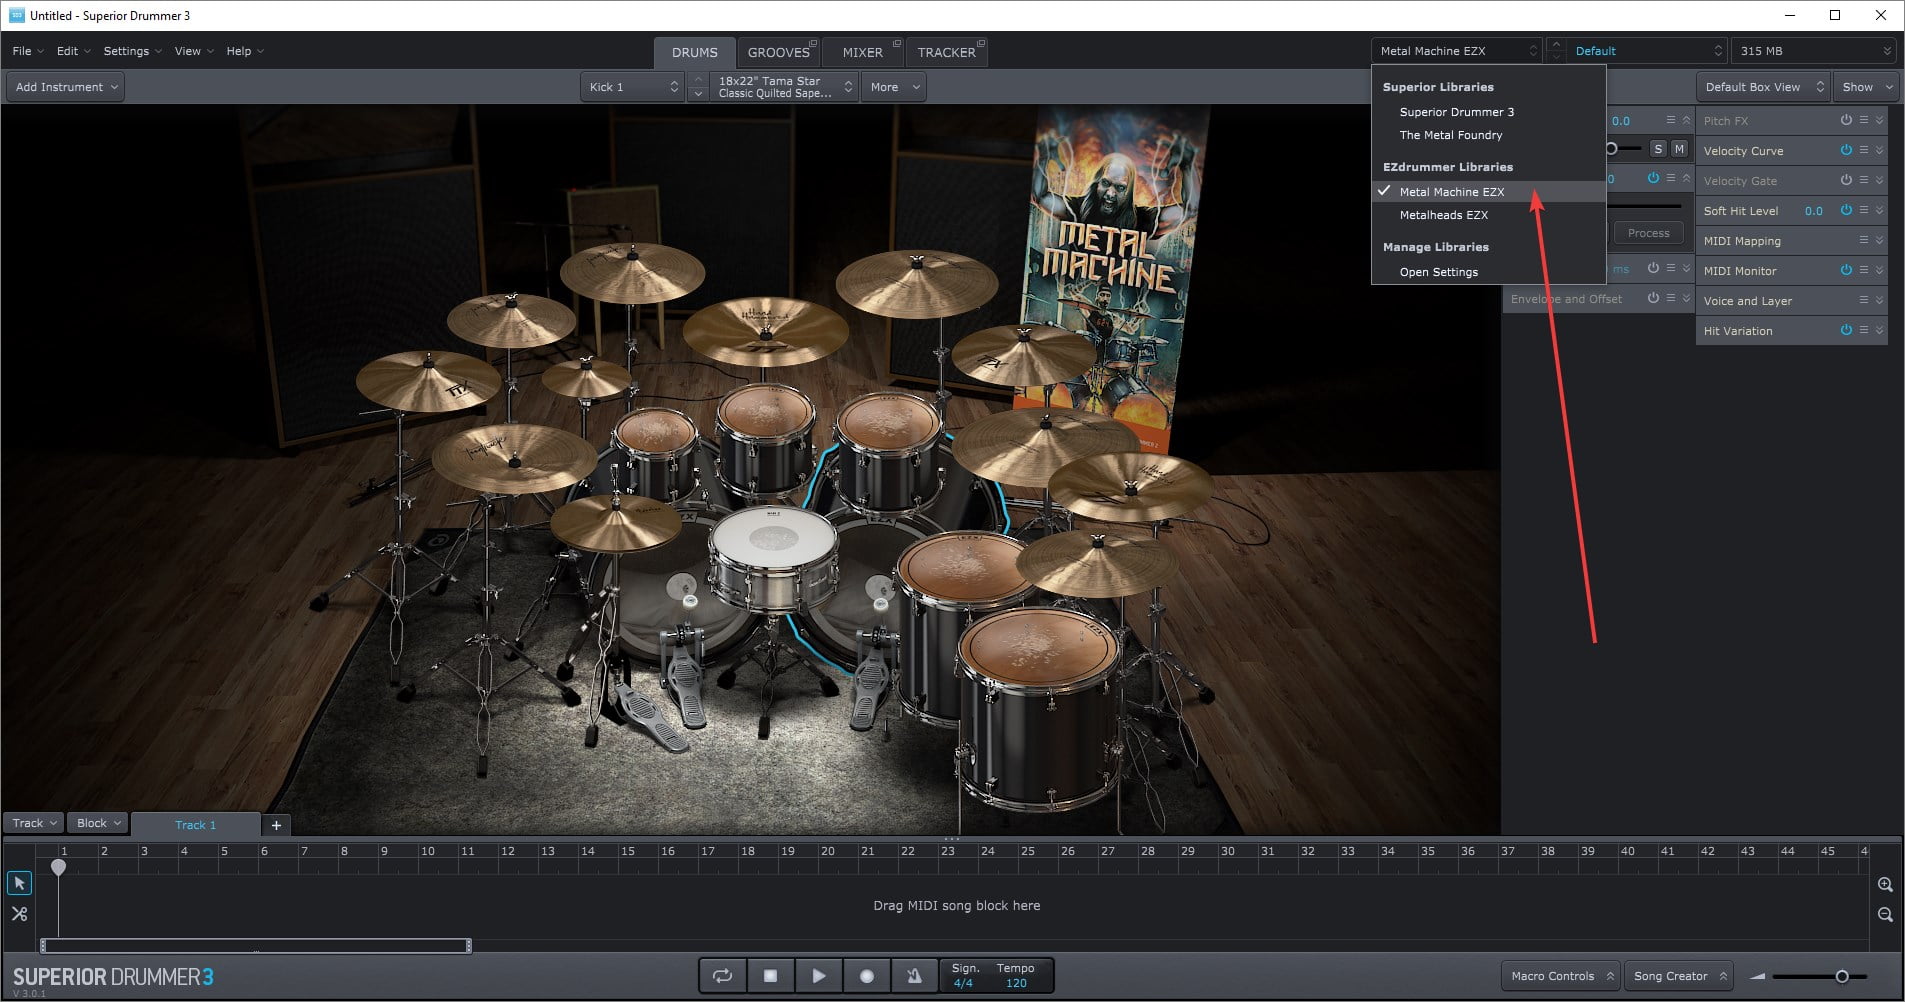 song creator for superior drummer 2